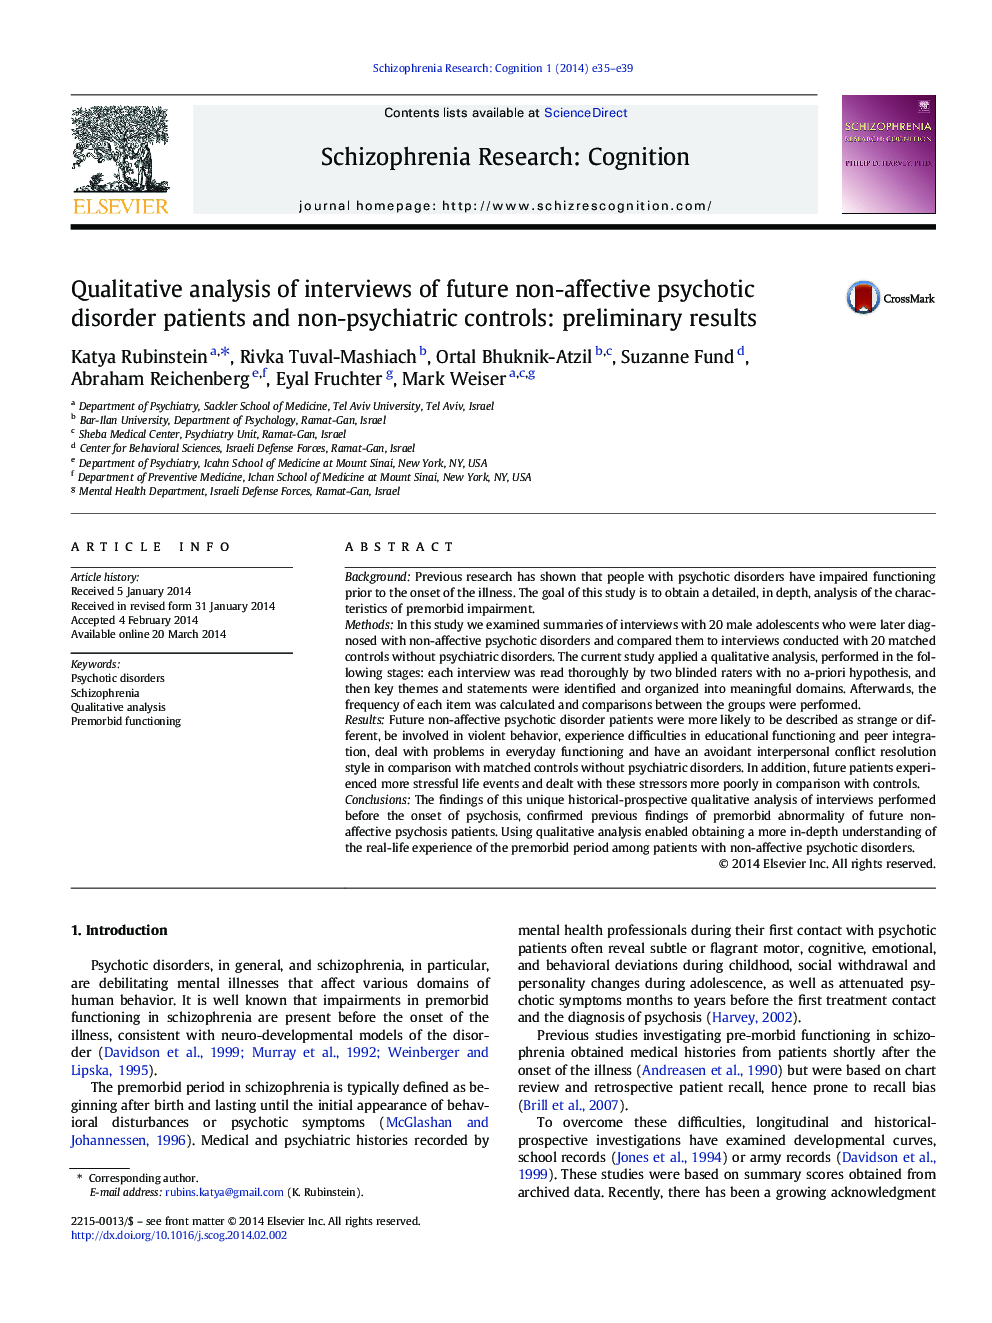 Qualitative analysis of interviews of future non-affective psychotic disorder patients and non-psychiatric controls: preliminary results 